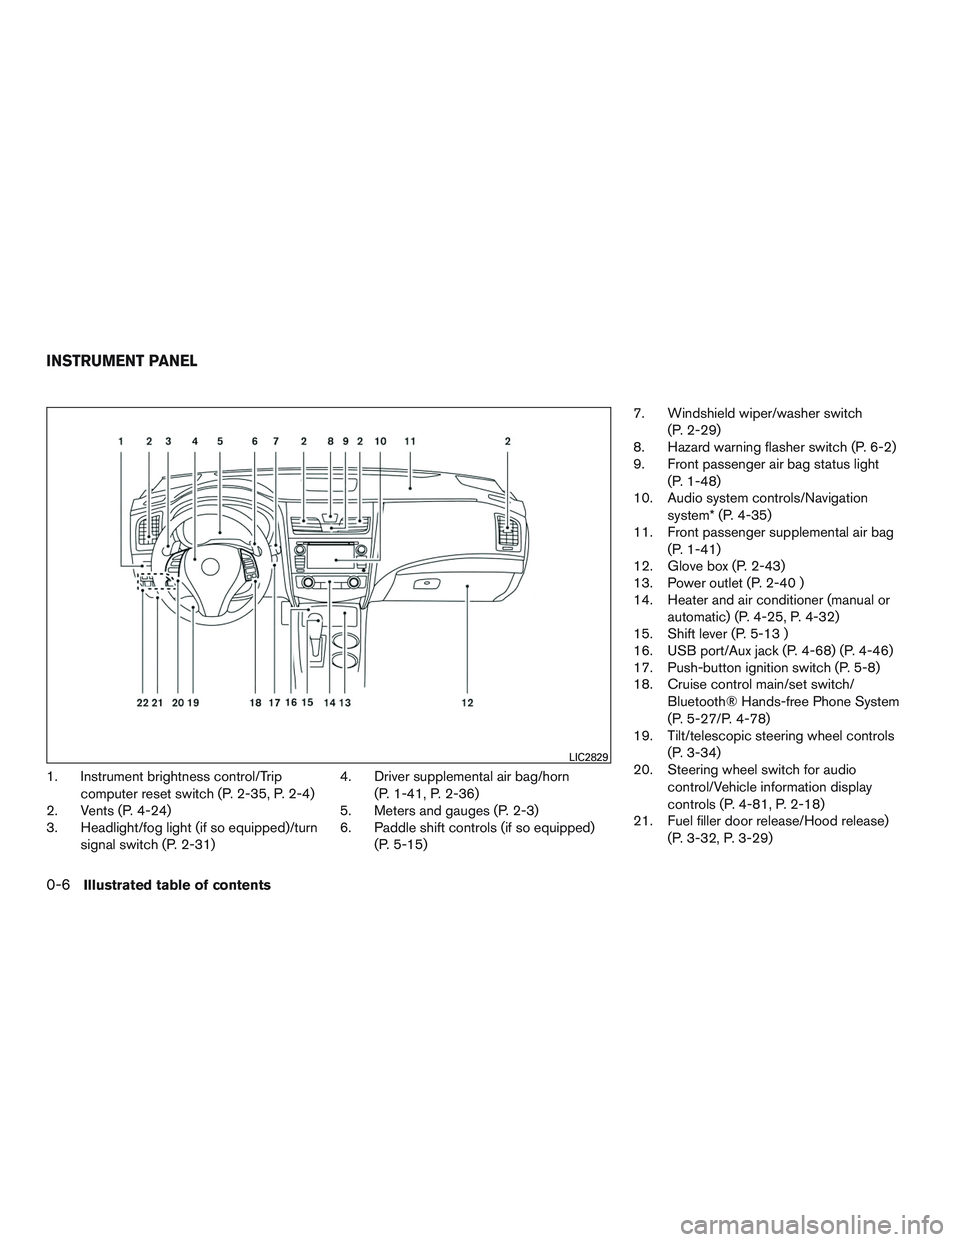 NISSAN ALTIMA SEDAN 2015 User Guide 1. Instrument brightness control/Tripcomputer reset switch (P. 2-35, P. 2-4)
2. Vents (P. 4-24)
3. Headlight/fog light (if so equipped)/turn
signal switch (P. 2-31) 4. Driver supplemental air bag/horn